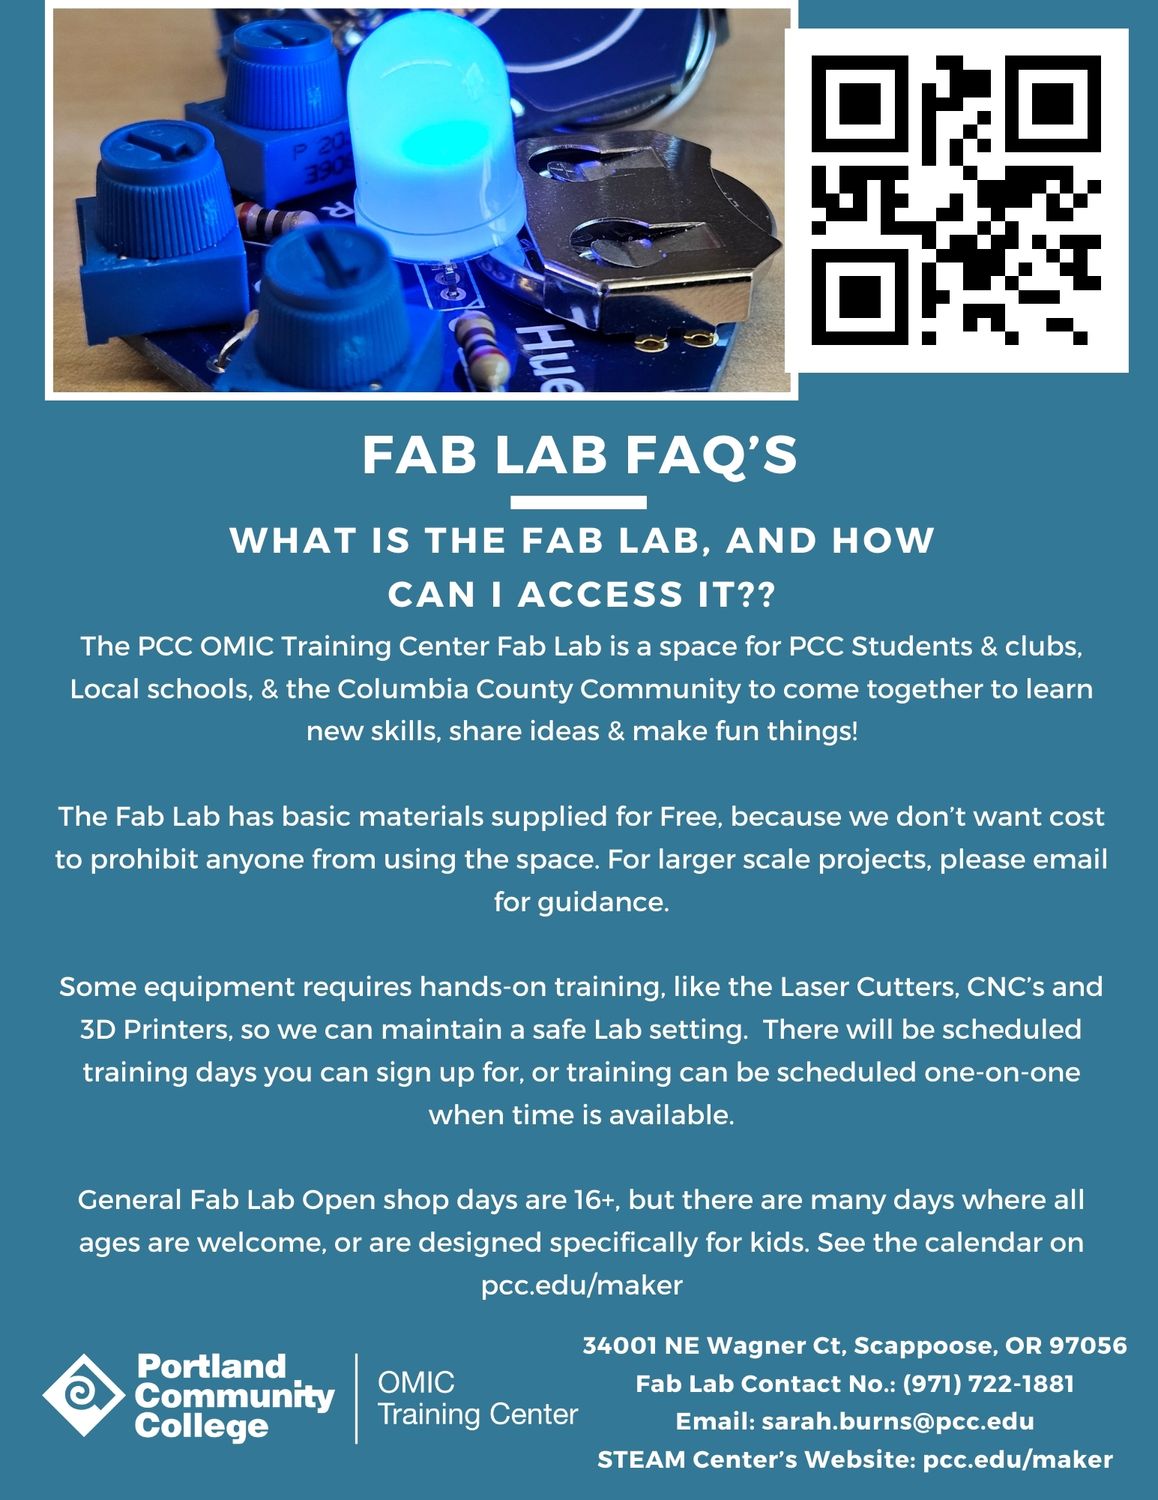 Fab Lab FAQs
What is the Fab Lab and how can I access it?

The PCC OMIC Training Center Fab Lab is a space for PCC Students & clubs, local schools, and the Columbia County community to come together to learn new skills, share ideas, and make fun things!

The Fab Lab has basic materials supplied for free because we don't want cost to prohibit anyone from using the space. For larger scale projects, please email for guidance.

Some equipment requires hands-on training, like the laser cutters, CNC routers, and 3d printers, so we can maintain a safe lab setting. There will be scheduled training days you can sign up for or training can be scheduled one-on-one when time is available.

General Fab Lab open shop days are for ages 16+, but there are many days where all ages are welcome or are designed specifically for kids. See the calendar on pcc.edu/maker. 

34001 NE Wagner Ct, Scappoose, OR 97056
Fab Lab Contact Number: 971 722 1881
Email: sarah.burns@pcc.edu
STEAM Center Website: pcc.edu/maker